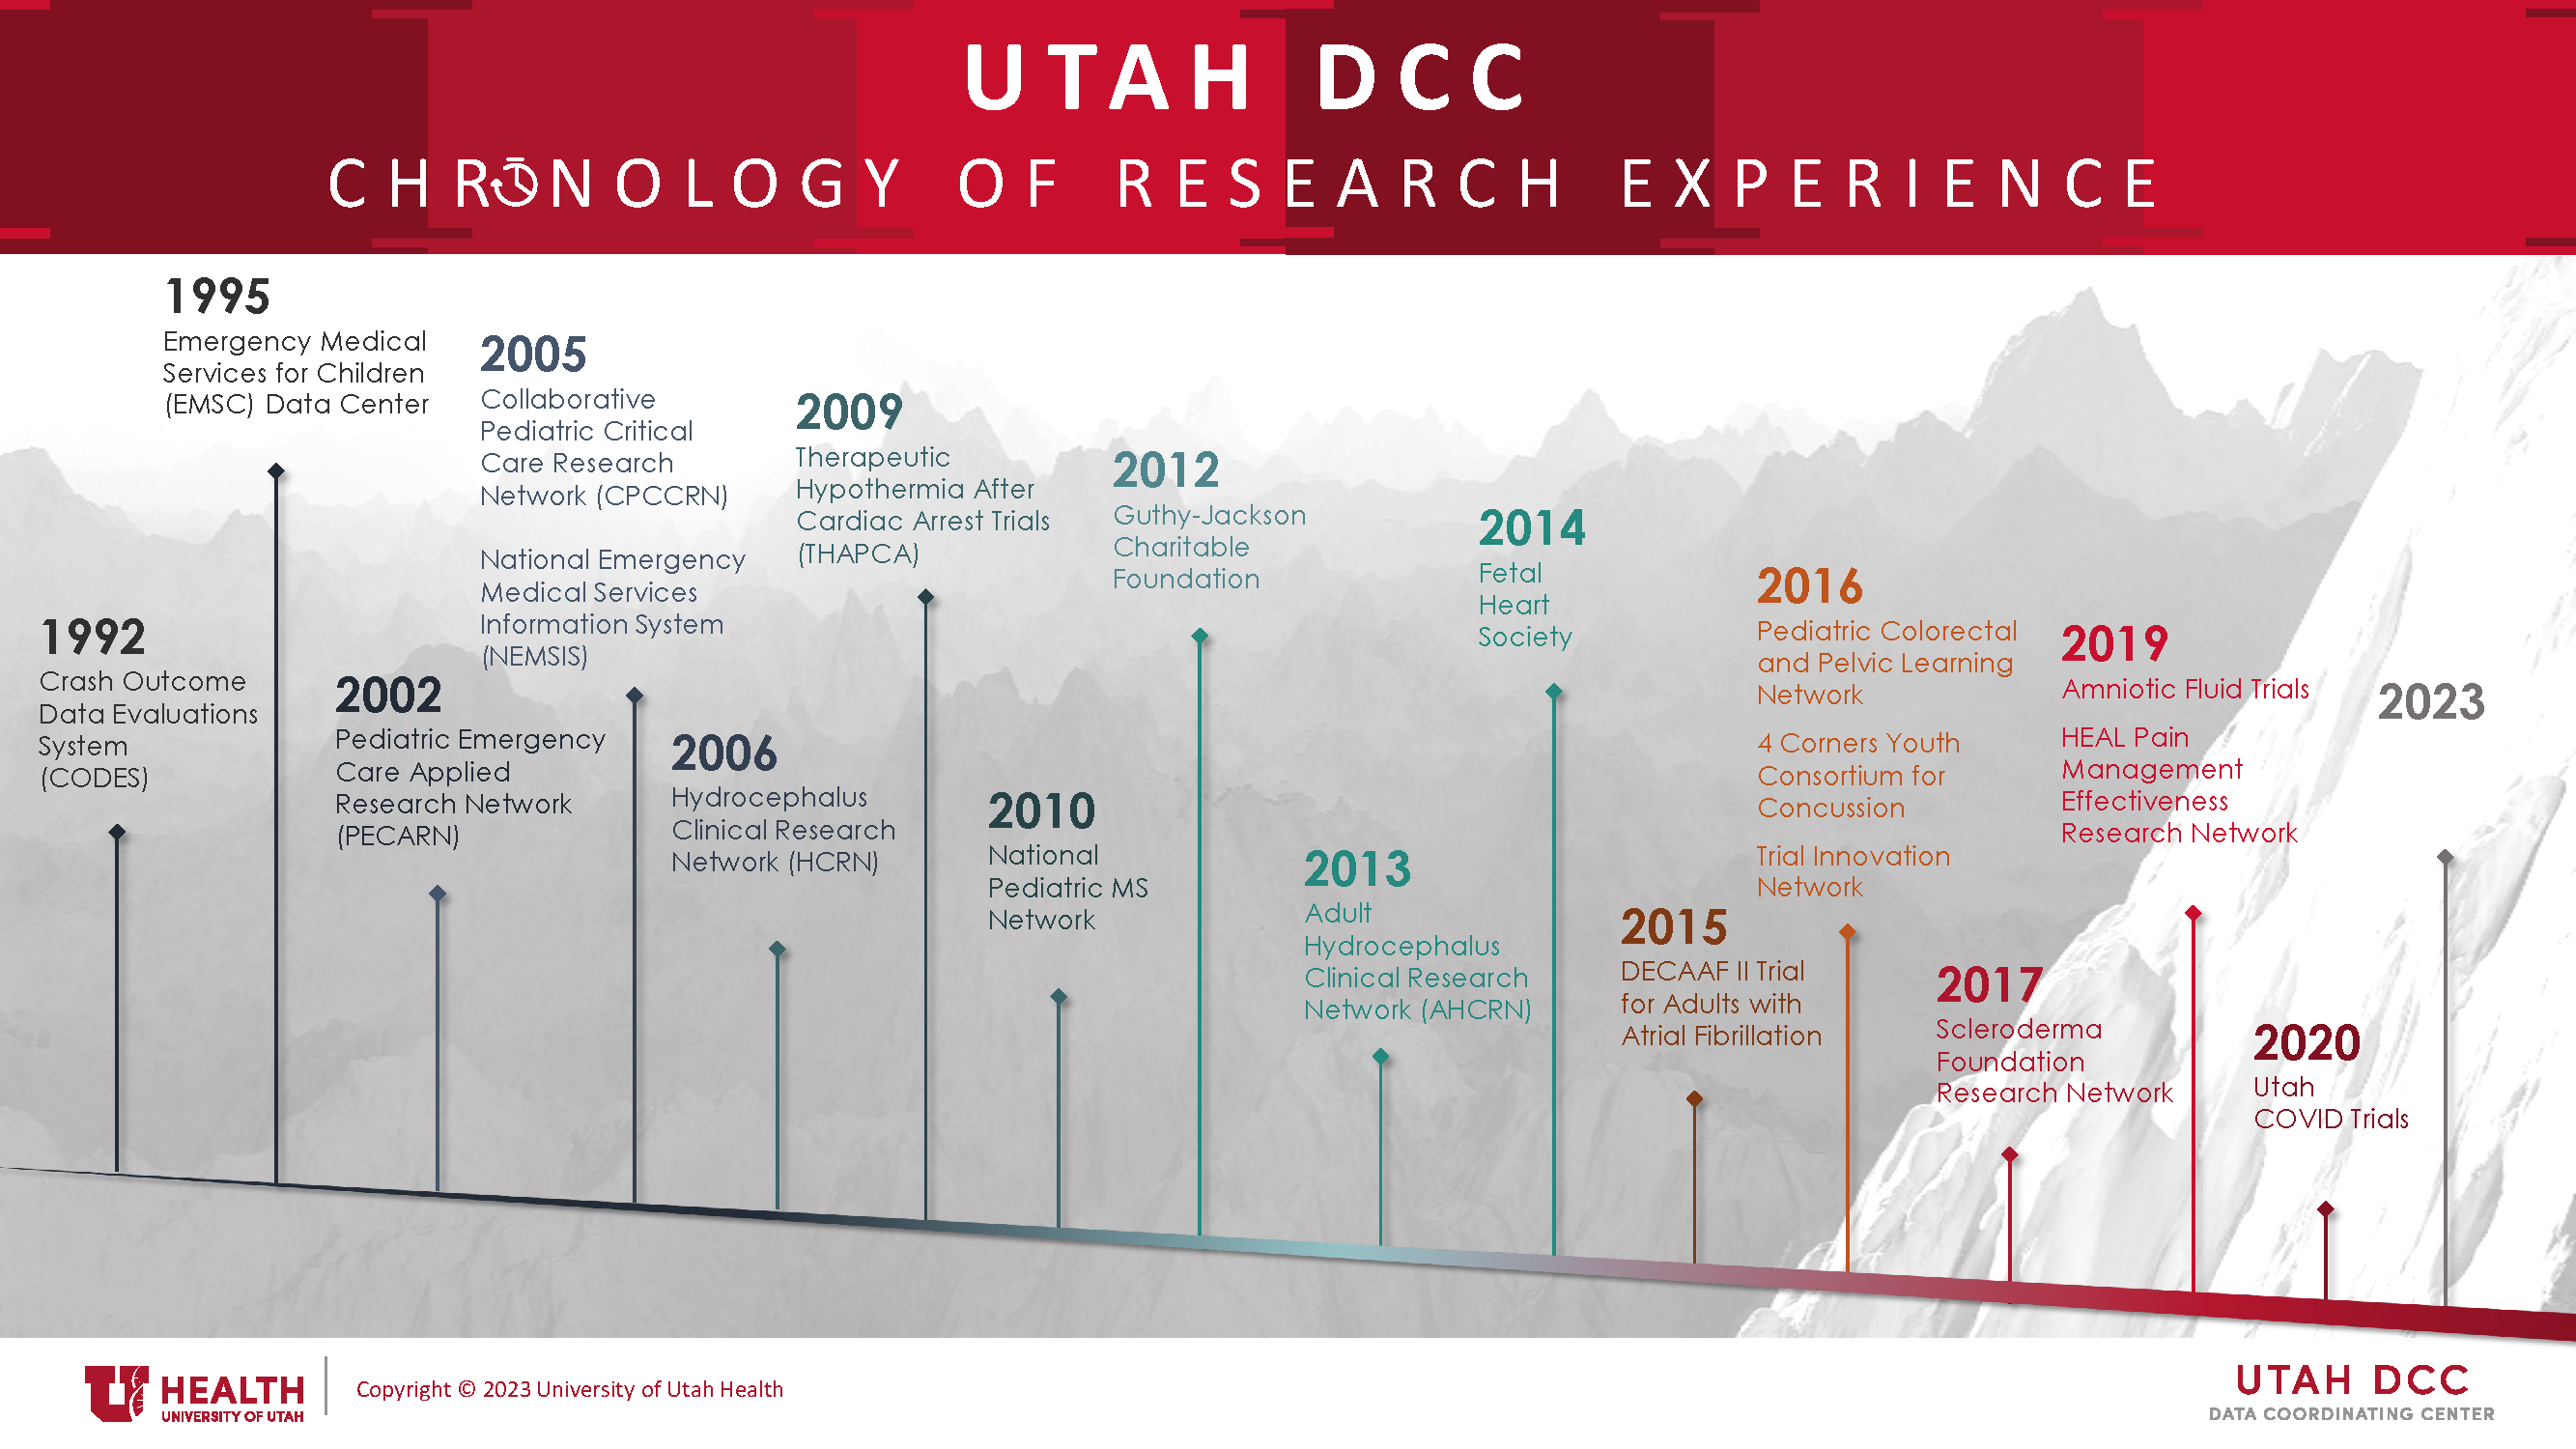 Utah DCC research experience